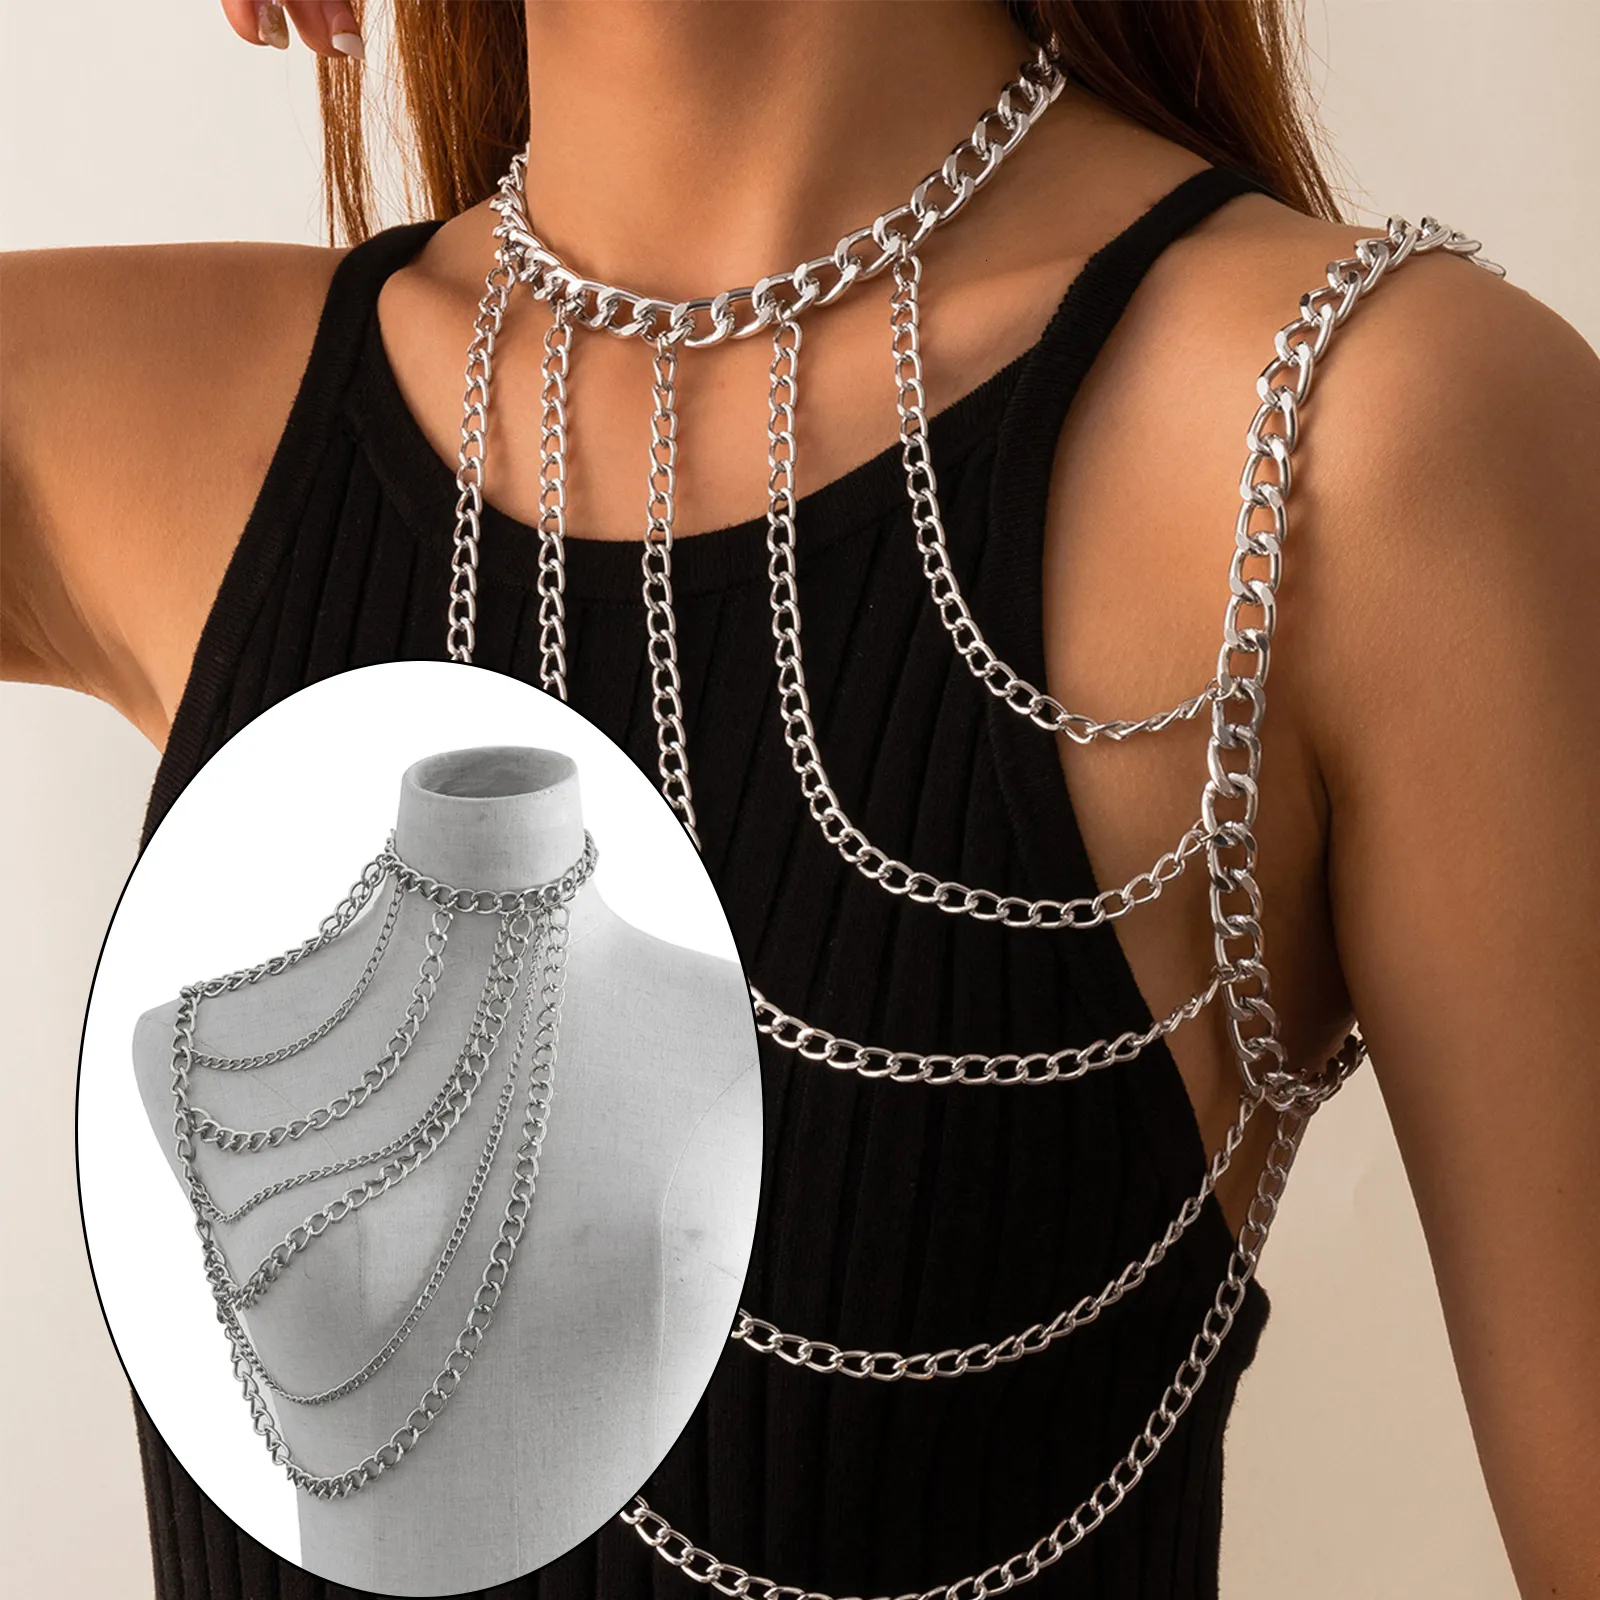 Sexy Body Chain One Shoulder Jewelry Chain Costume Necklaces for Women Girls